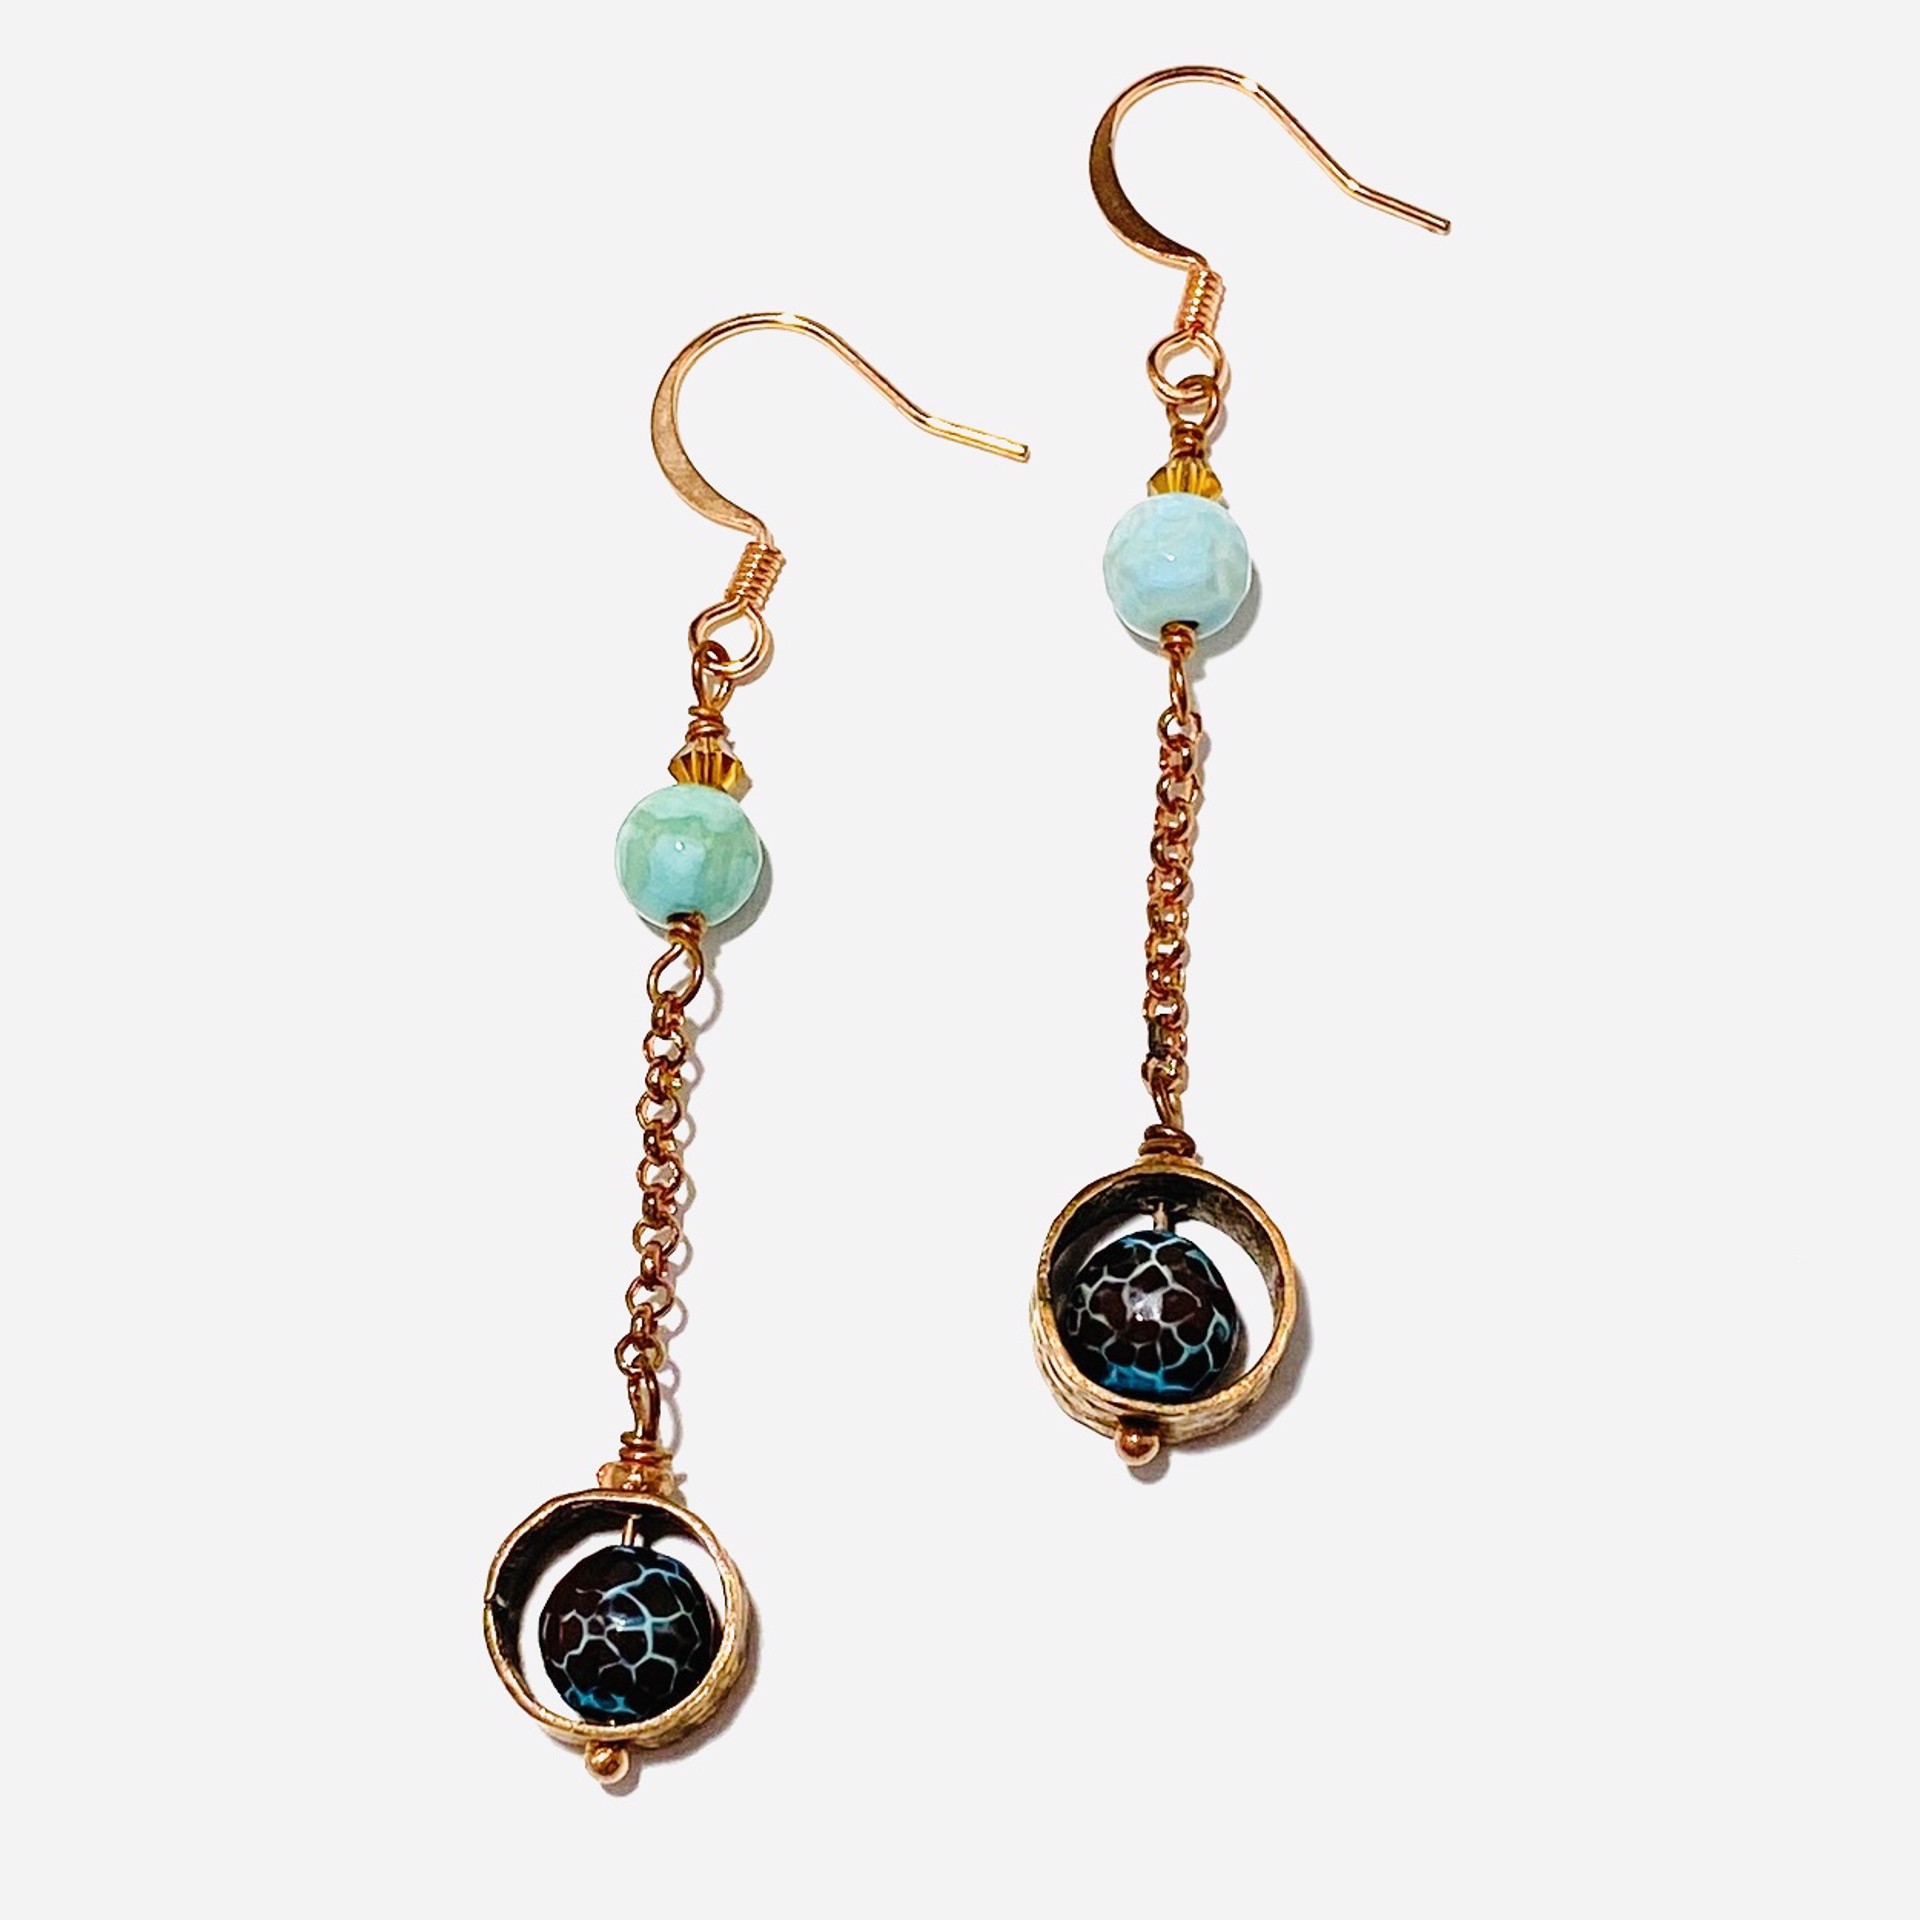 Cracked Agate, Handmade Copper Earrings, LR23-55 by Legare Riano